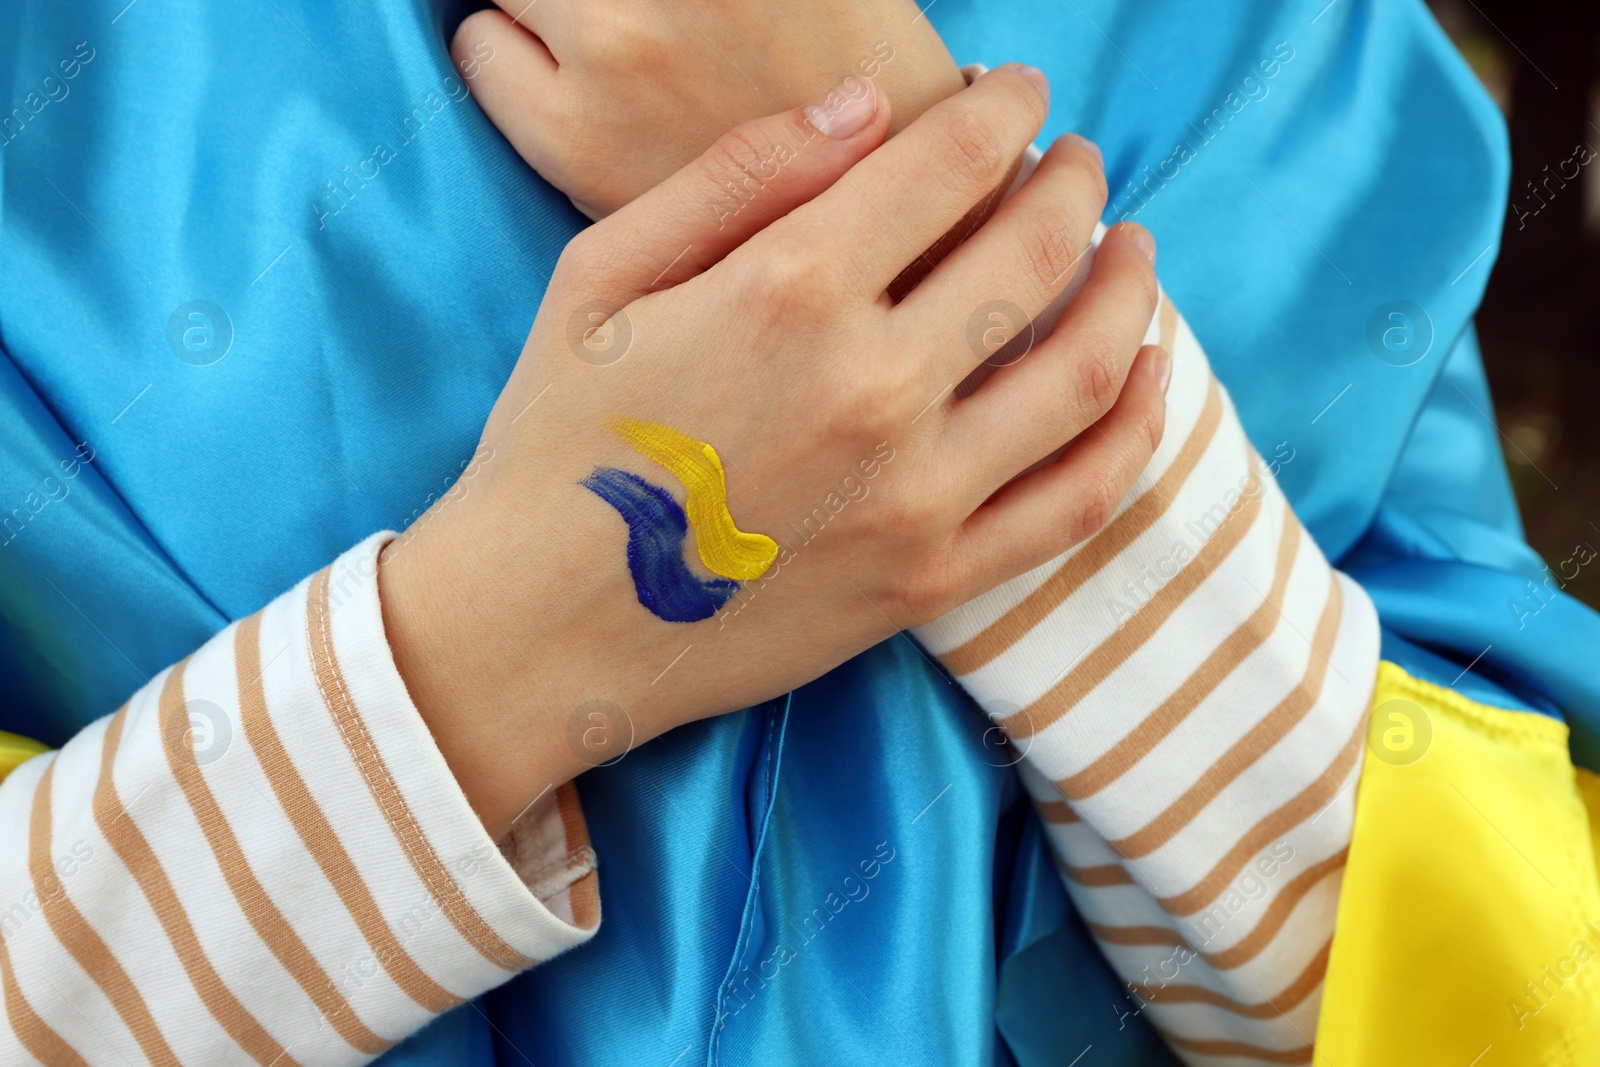 Photo of Woman with drawing of Ukrainian flag on hand against blurred background, closeup